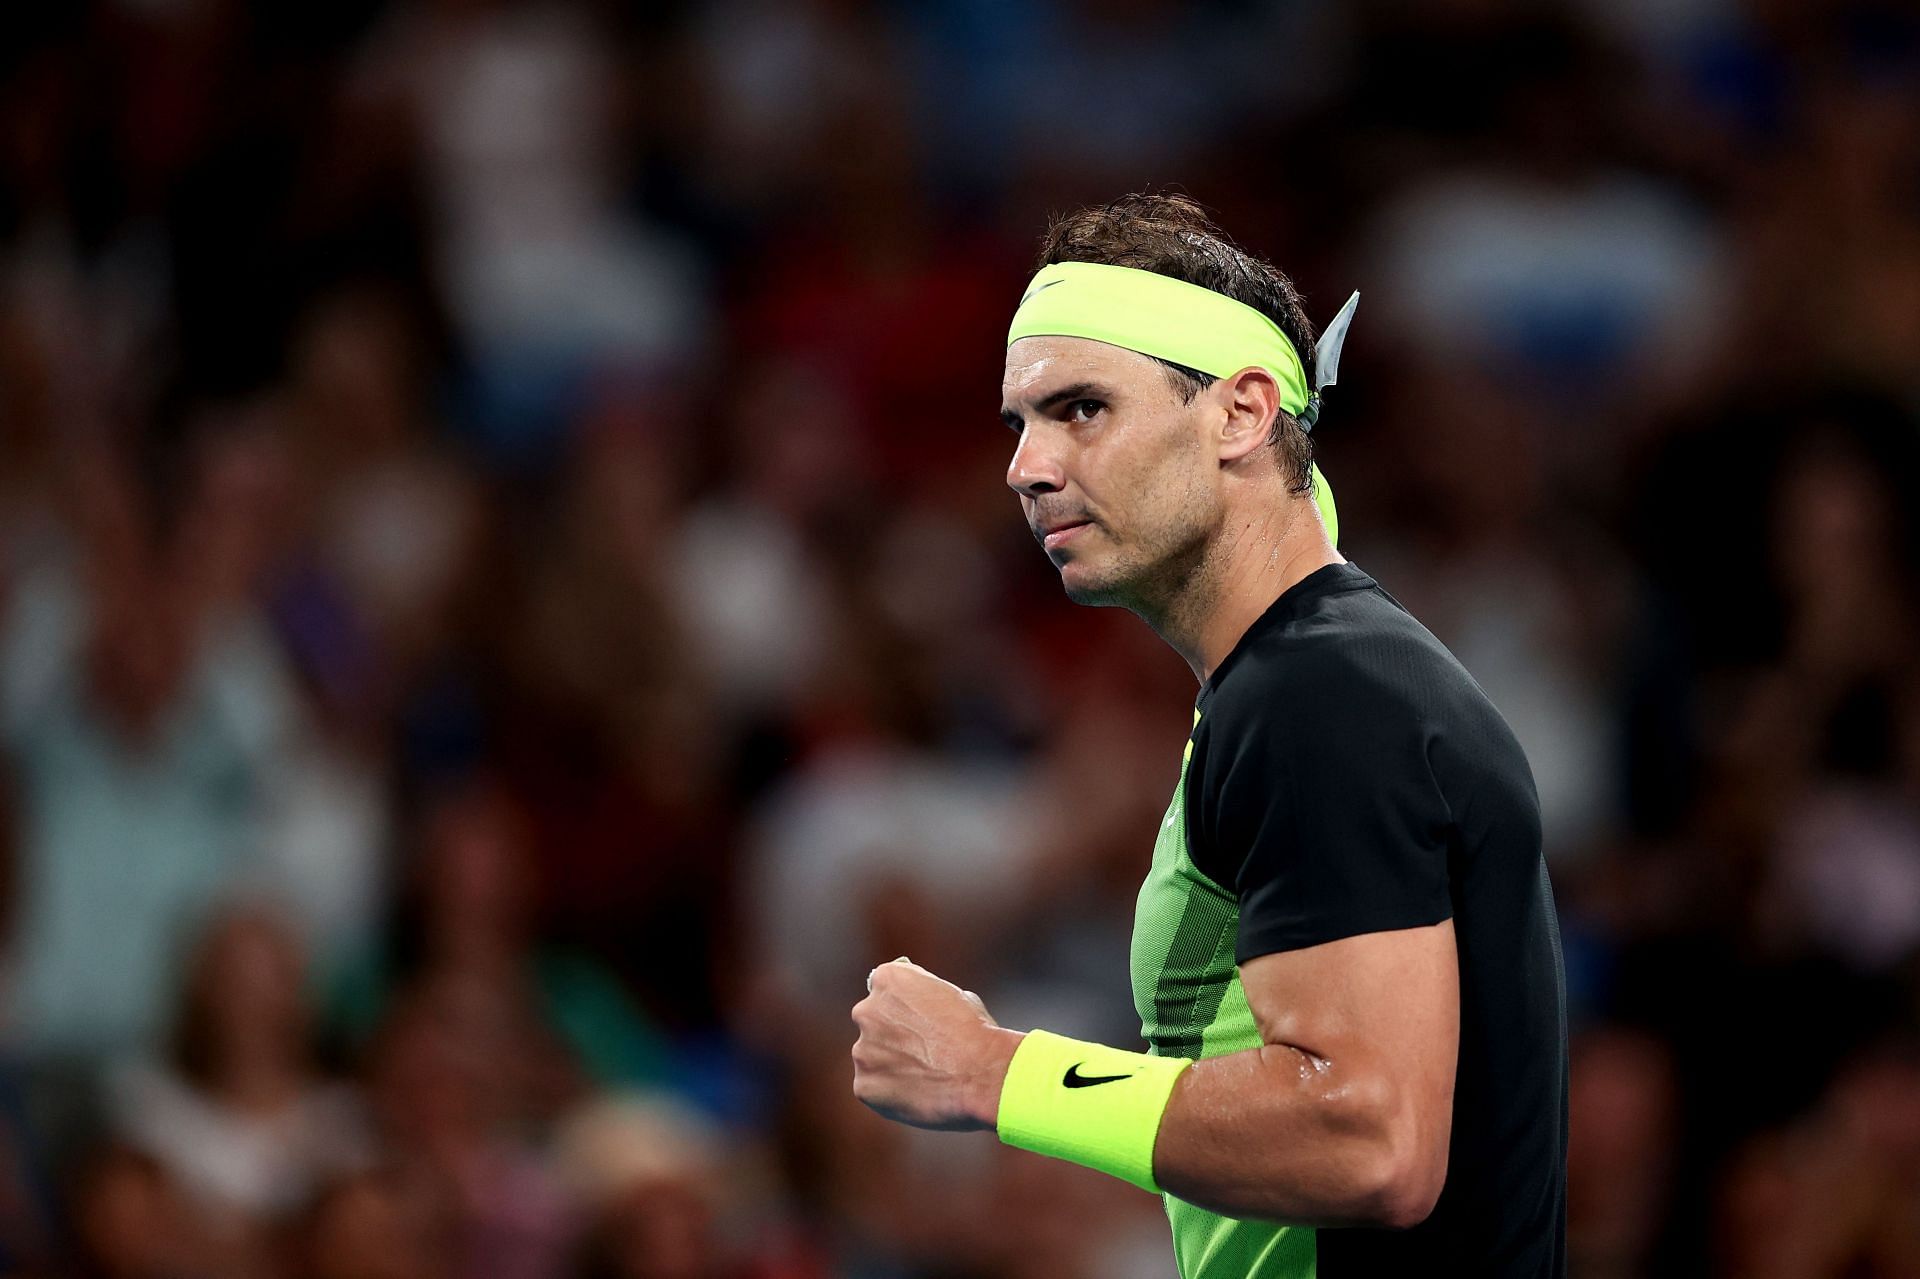 Rafael Nadal will be hoping to defend his title at the 2023 Australian Open